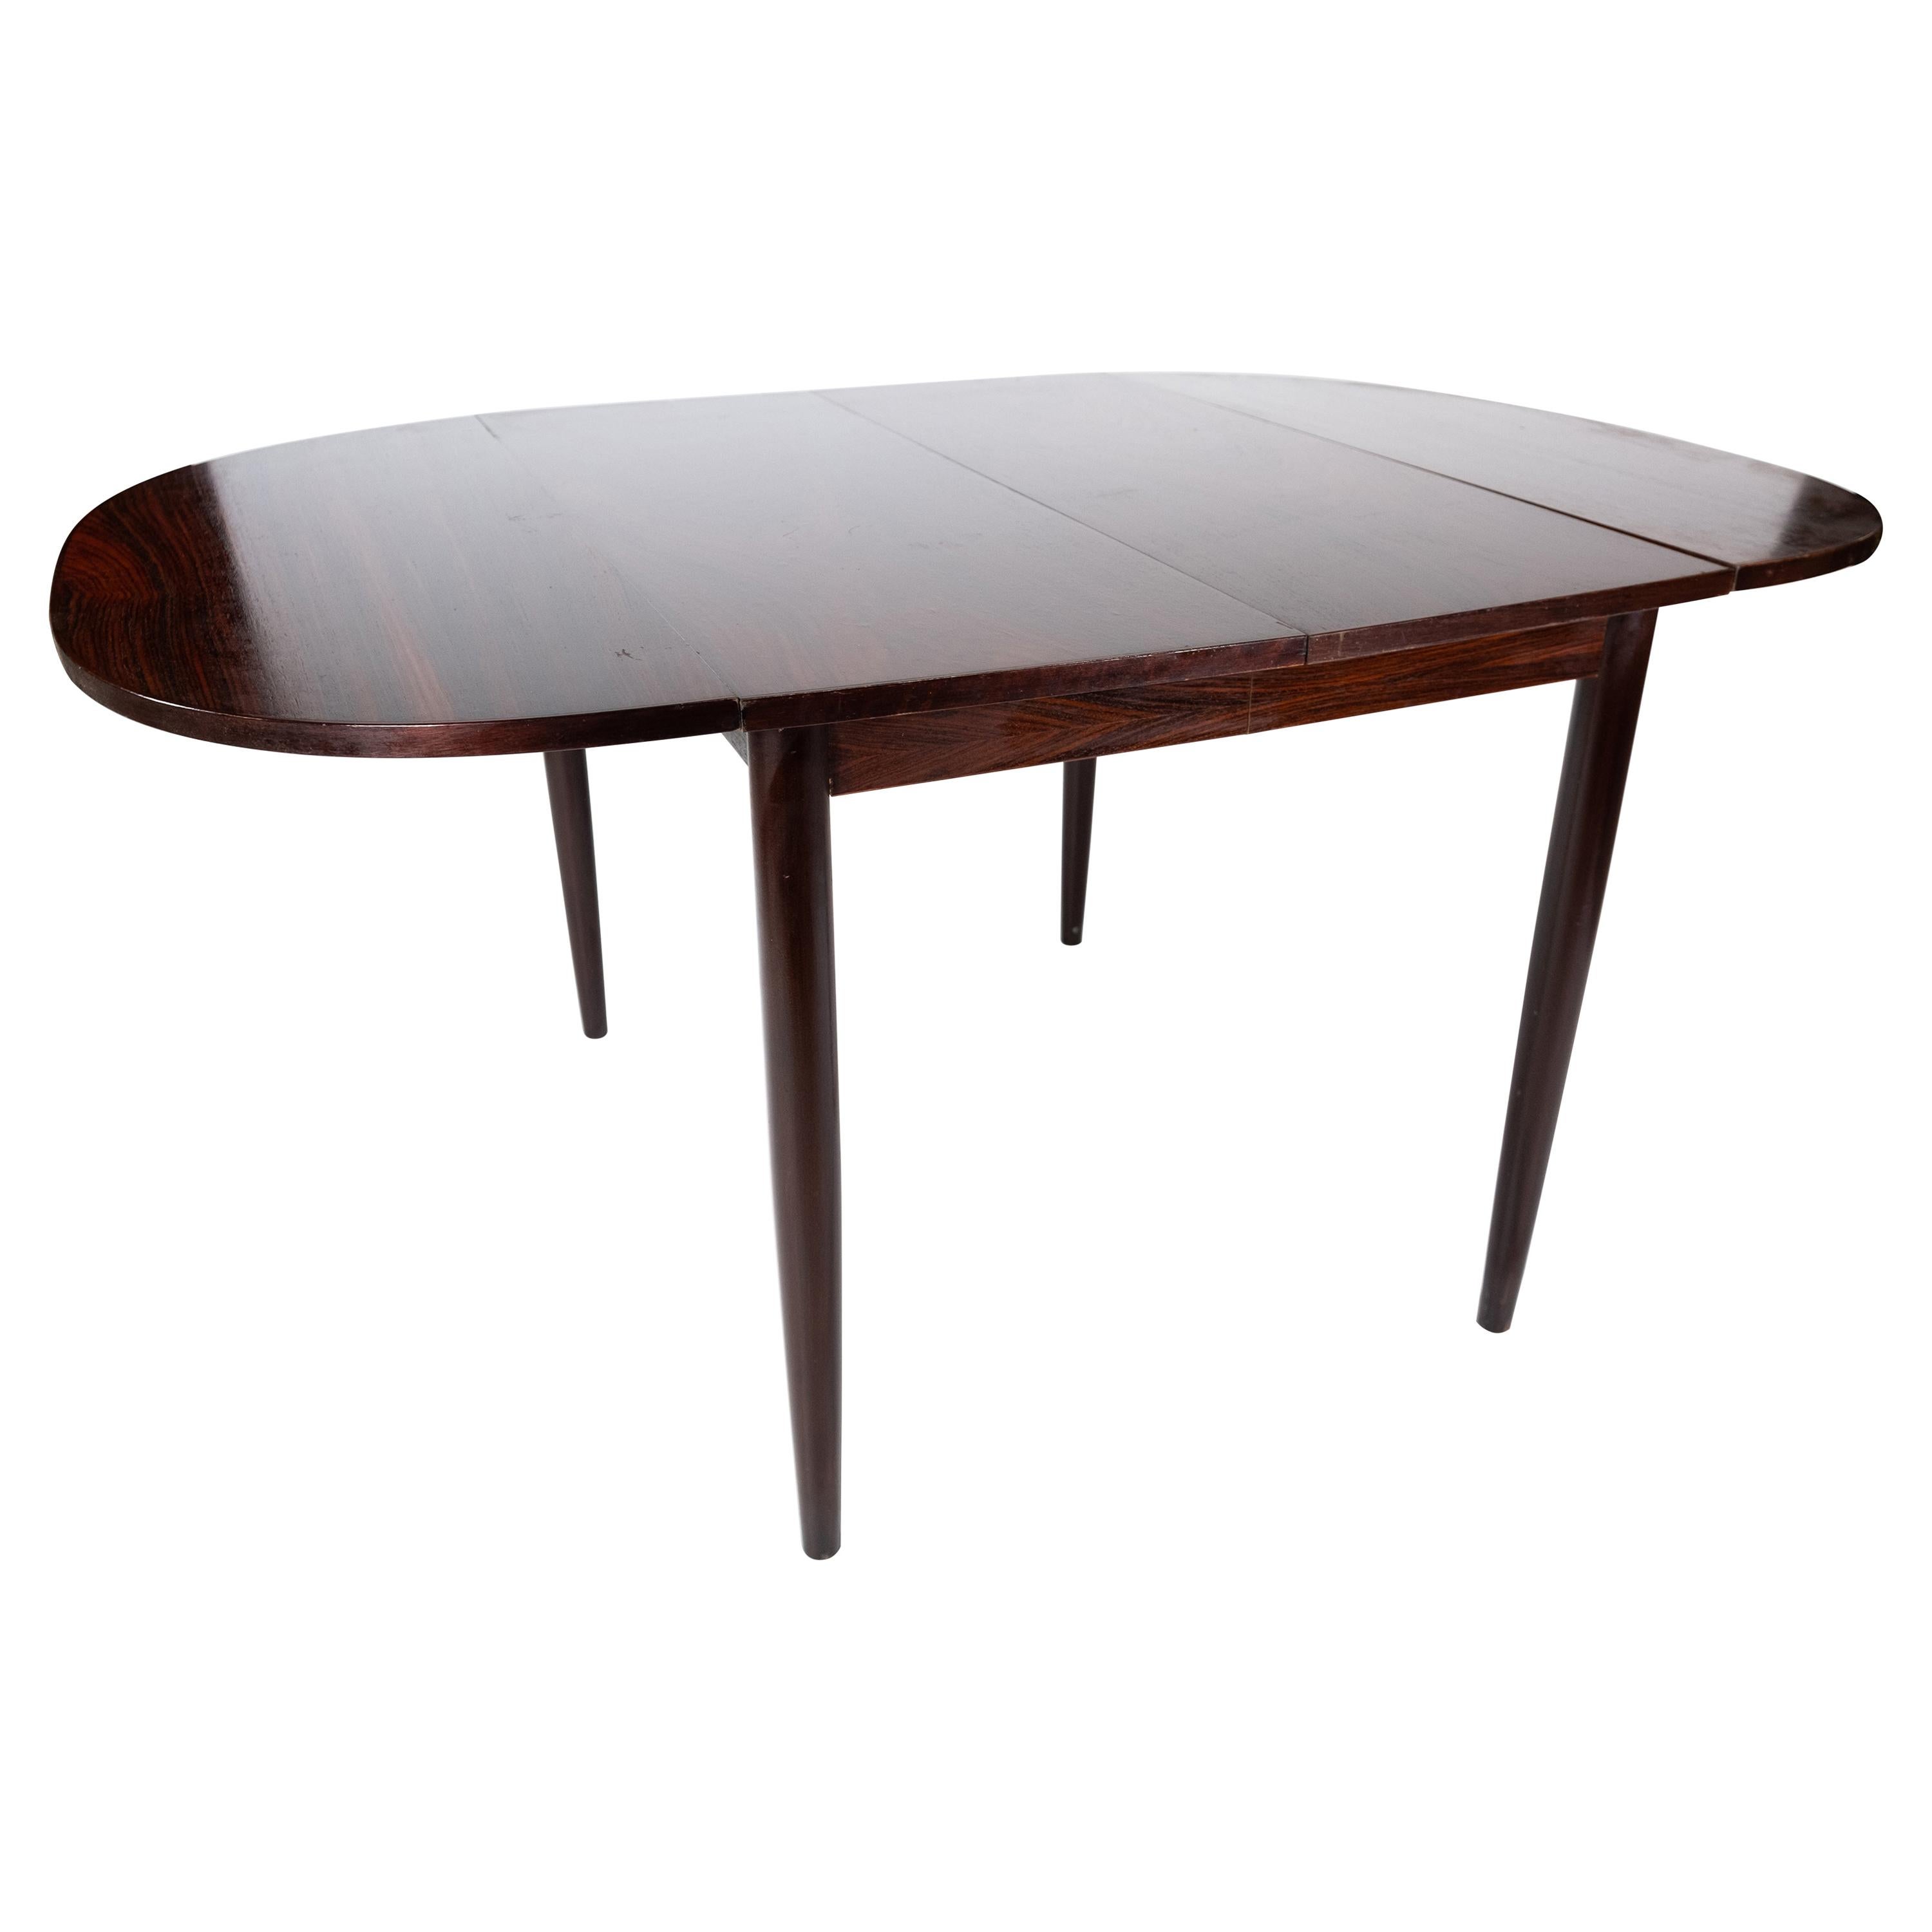 Dining Table in Rosewood with Extensions Designed by Arne Vodder from the 1960s For Sale